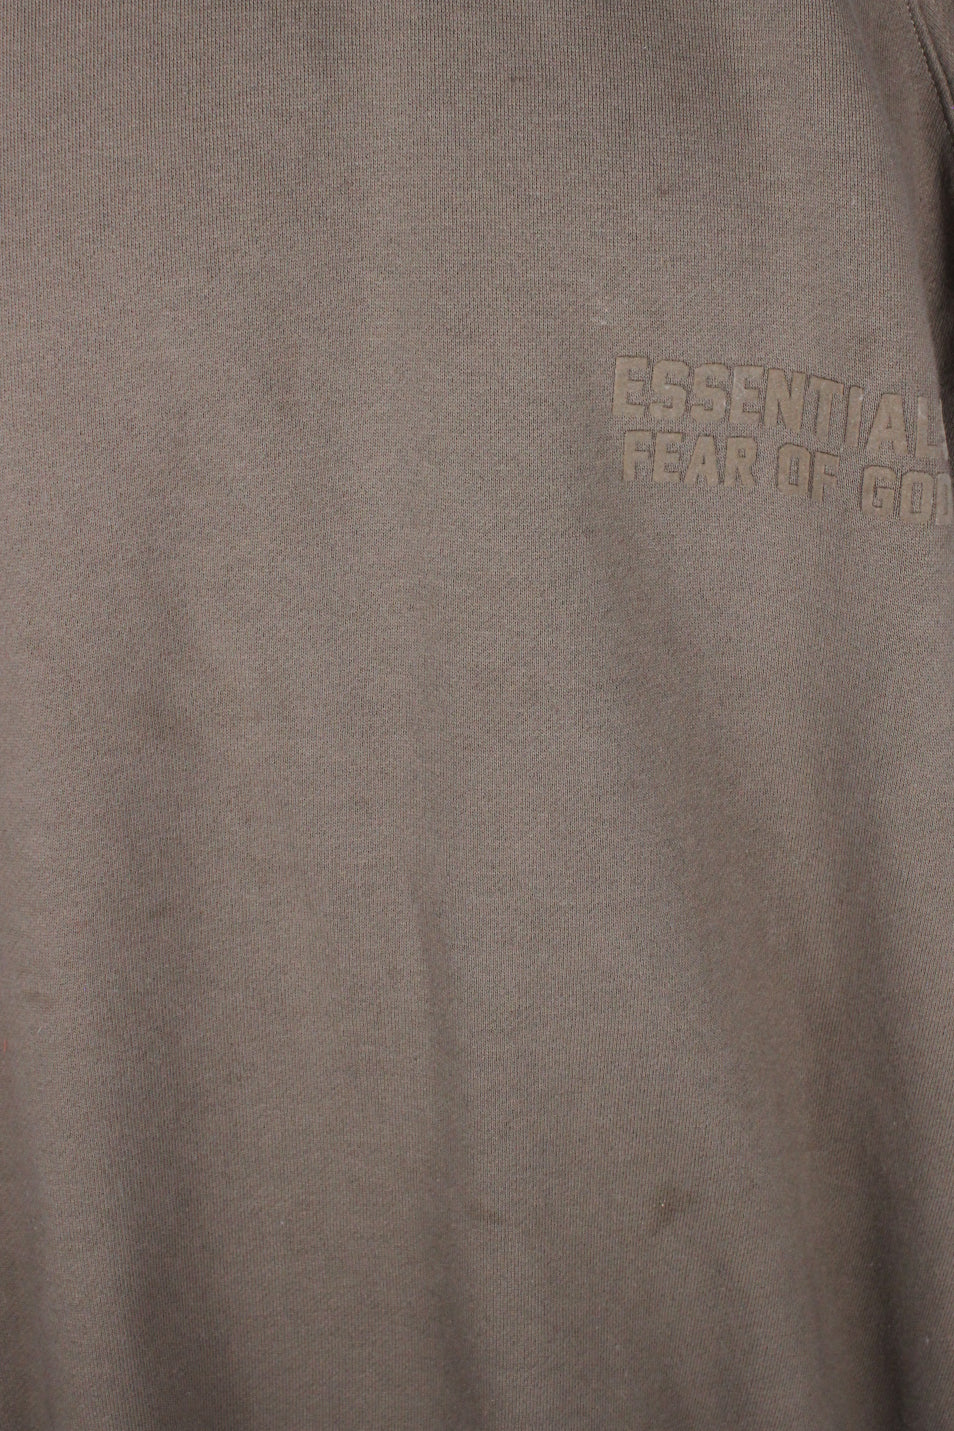 detail view of stains at front below 'essentials fear of god' felt letters at left breast of sweatshirt.